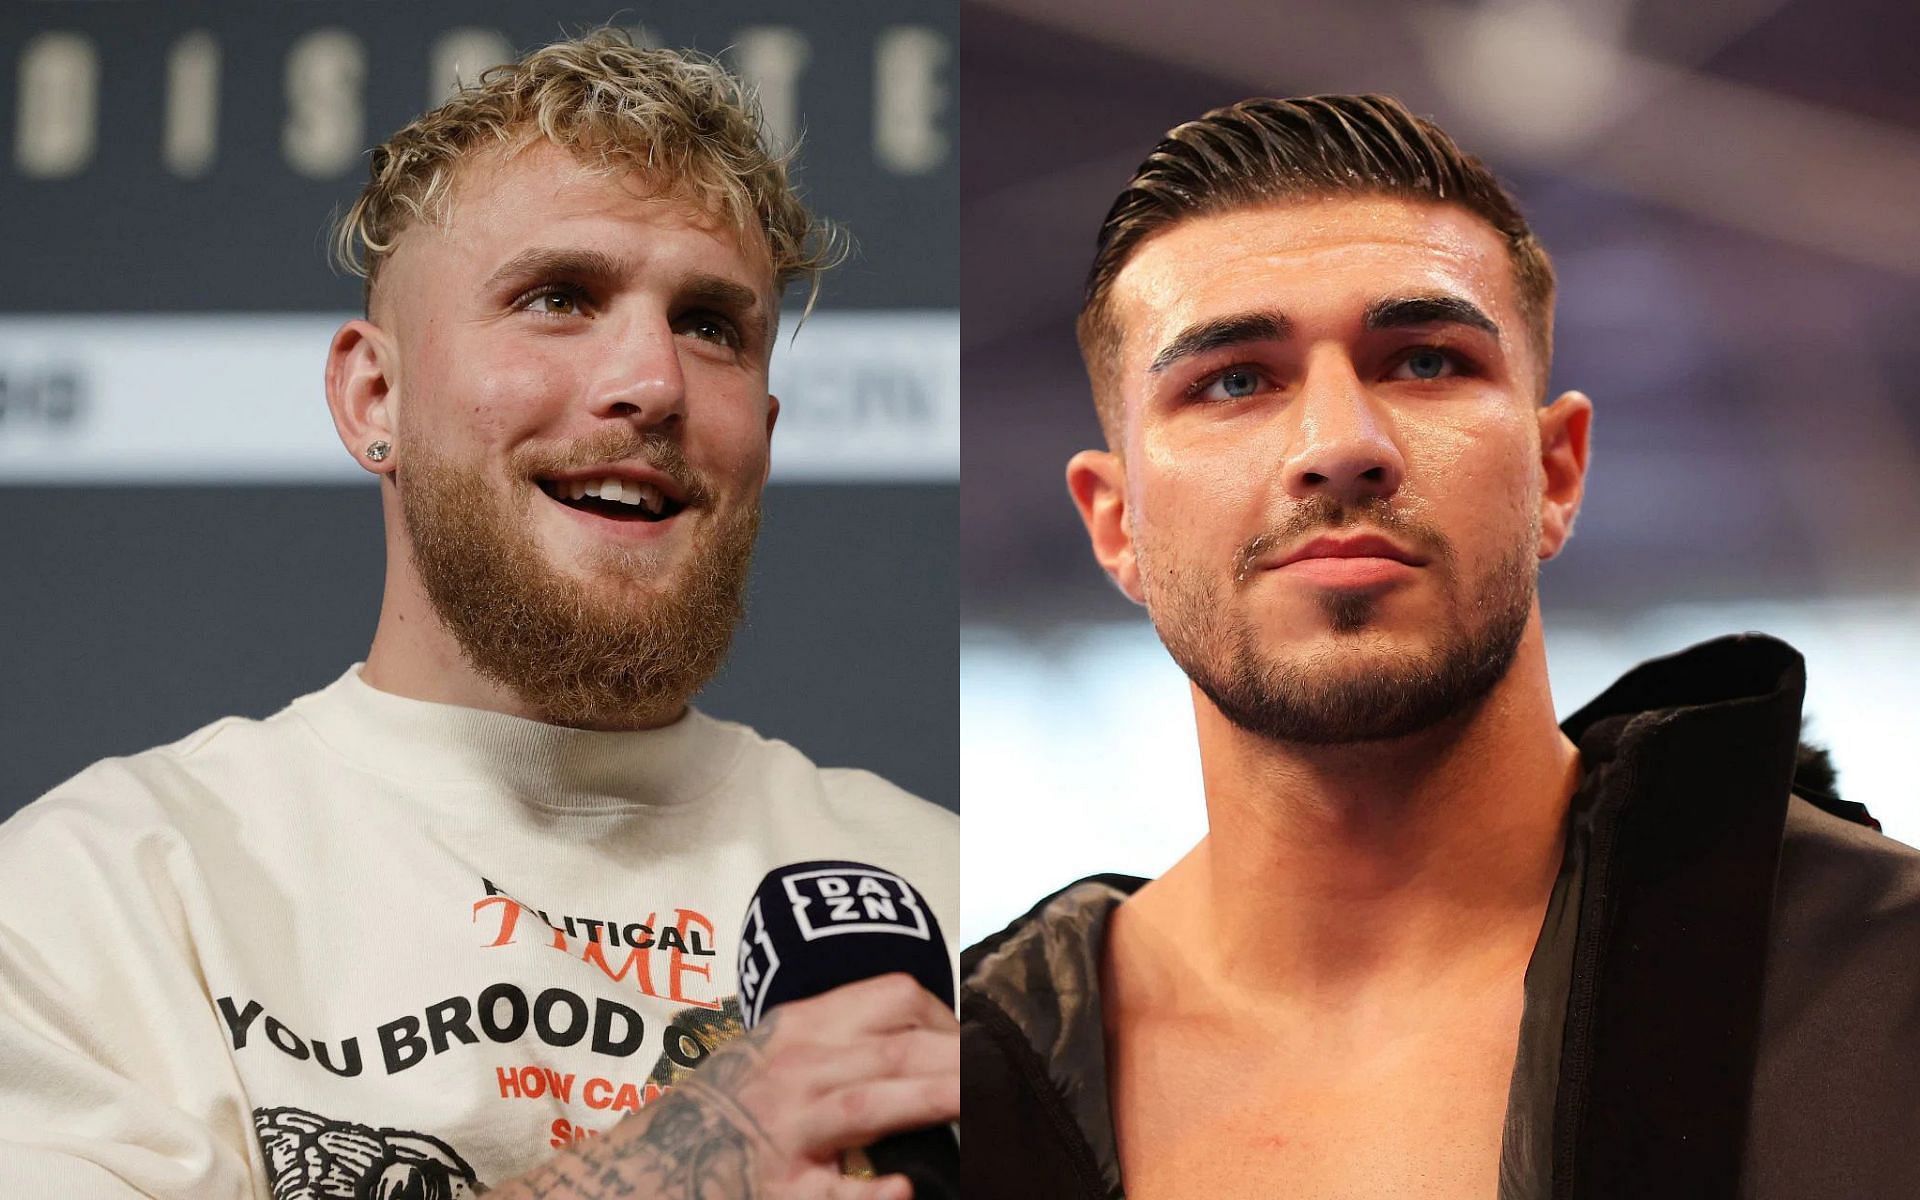 Jake Paul (Left) and Tommy Fury (Right) (Images courtesy of Getty)